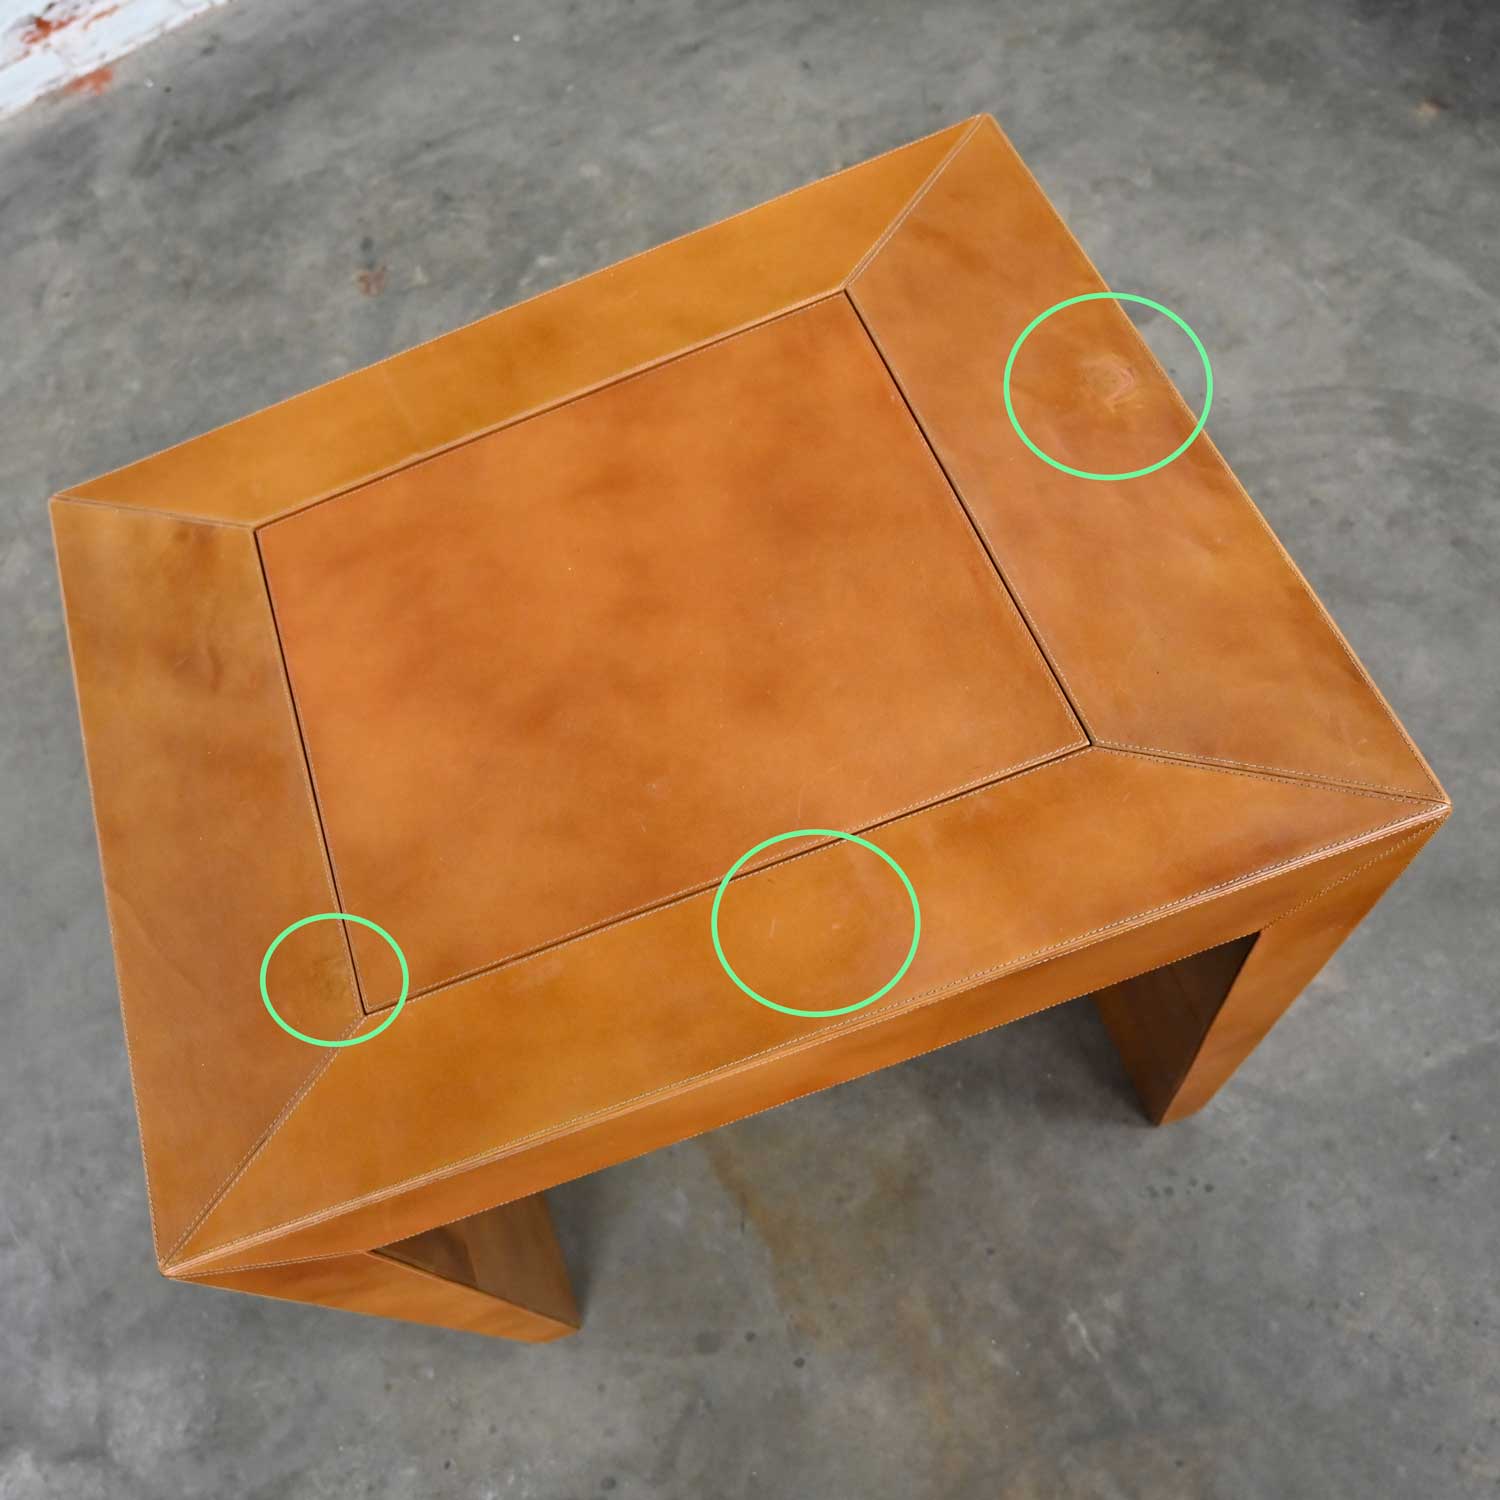 Modern to Post Modern Cognac Leather Game Table with Angled Legs from India